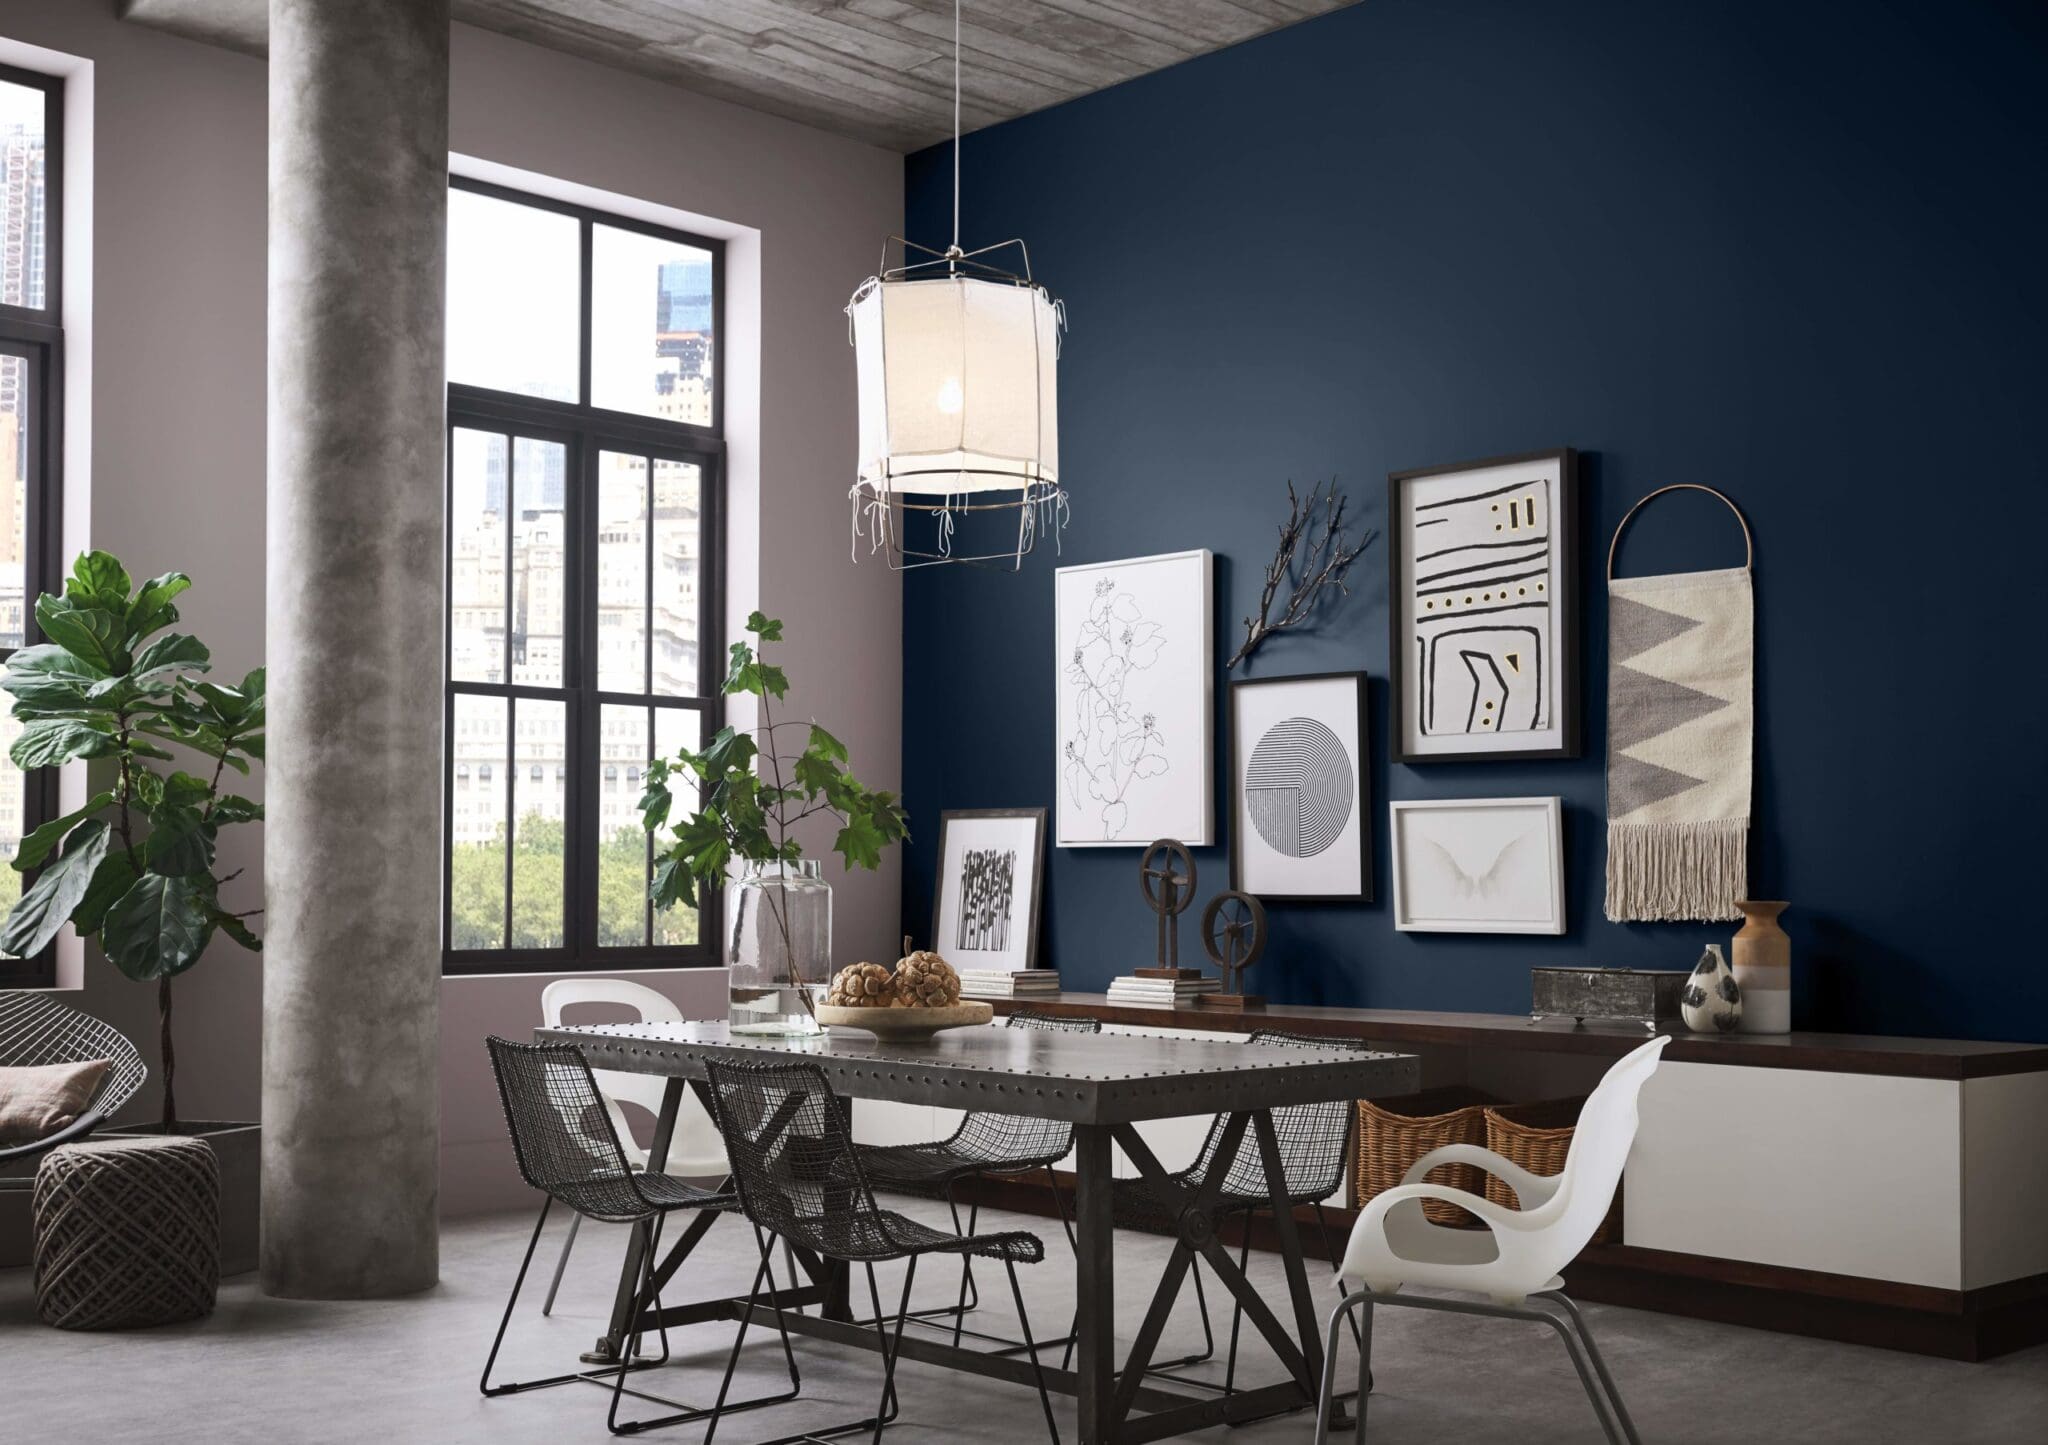 Color Trends Reveal Desire for Calm, Clean Home Interiors